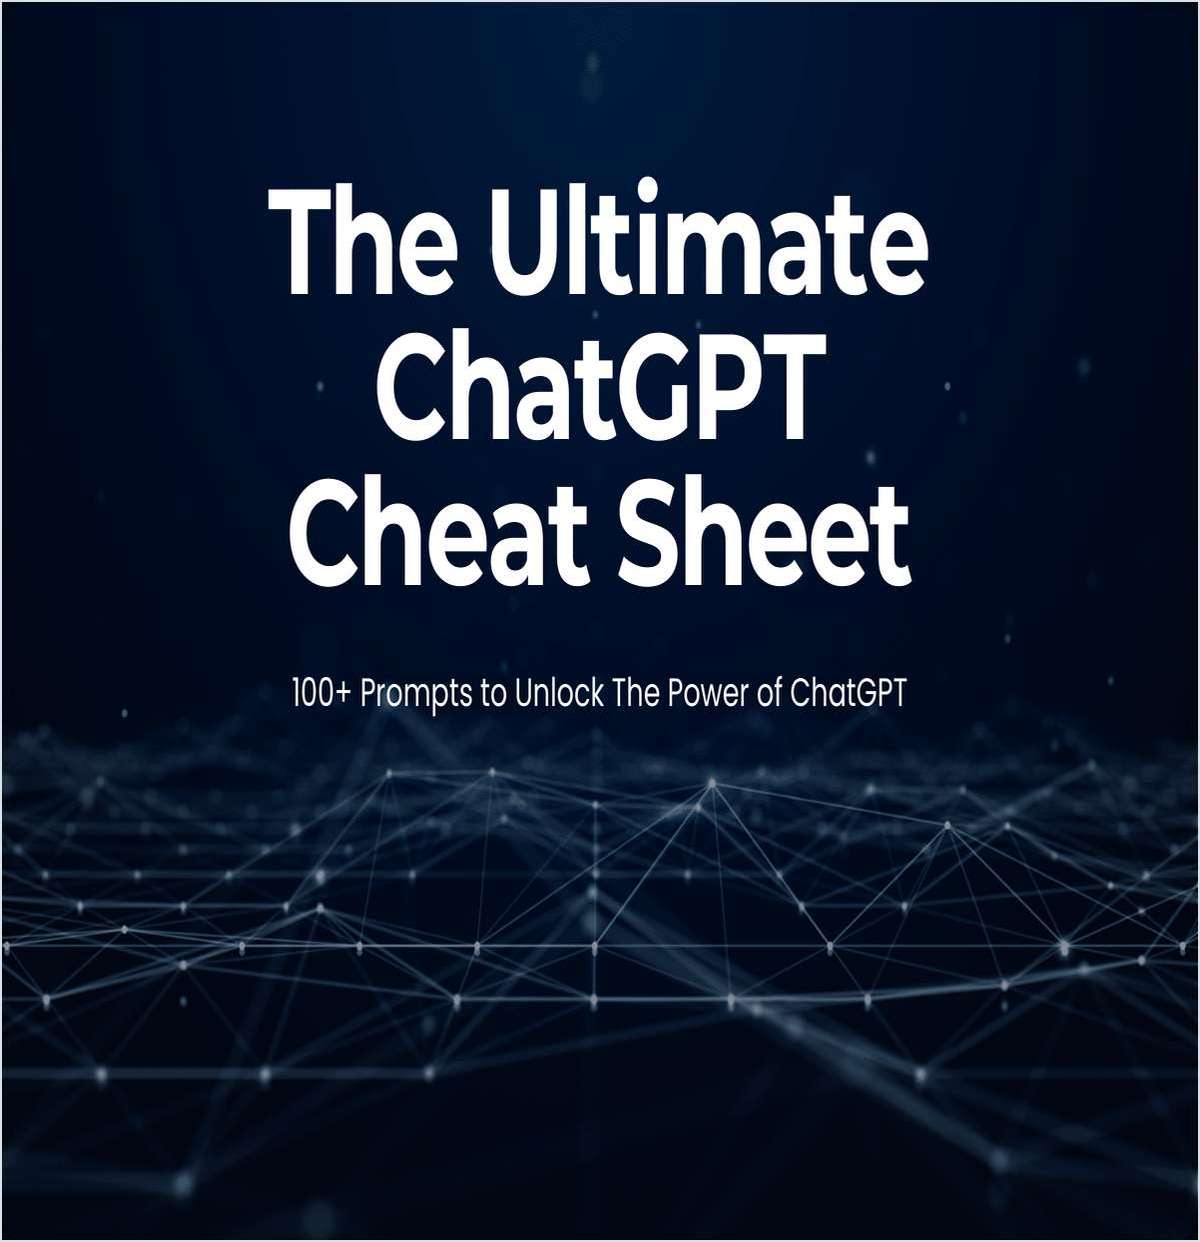 The Ultimate ChatGPT Cheat Sheet